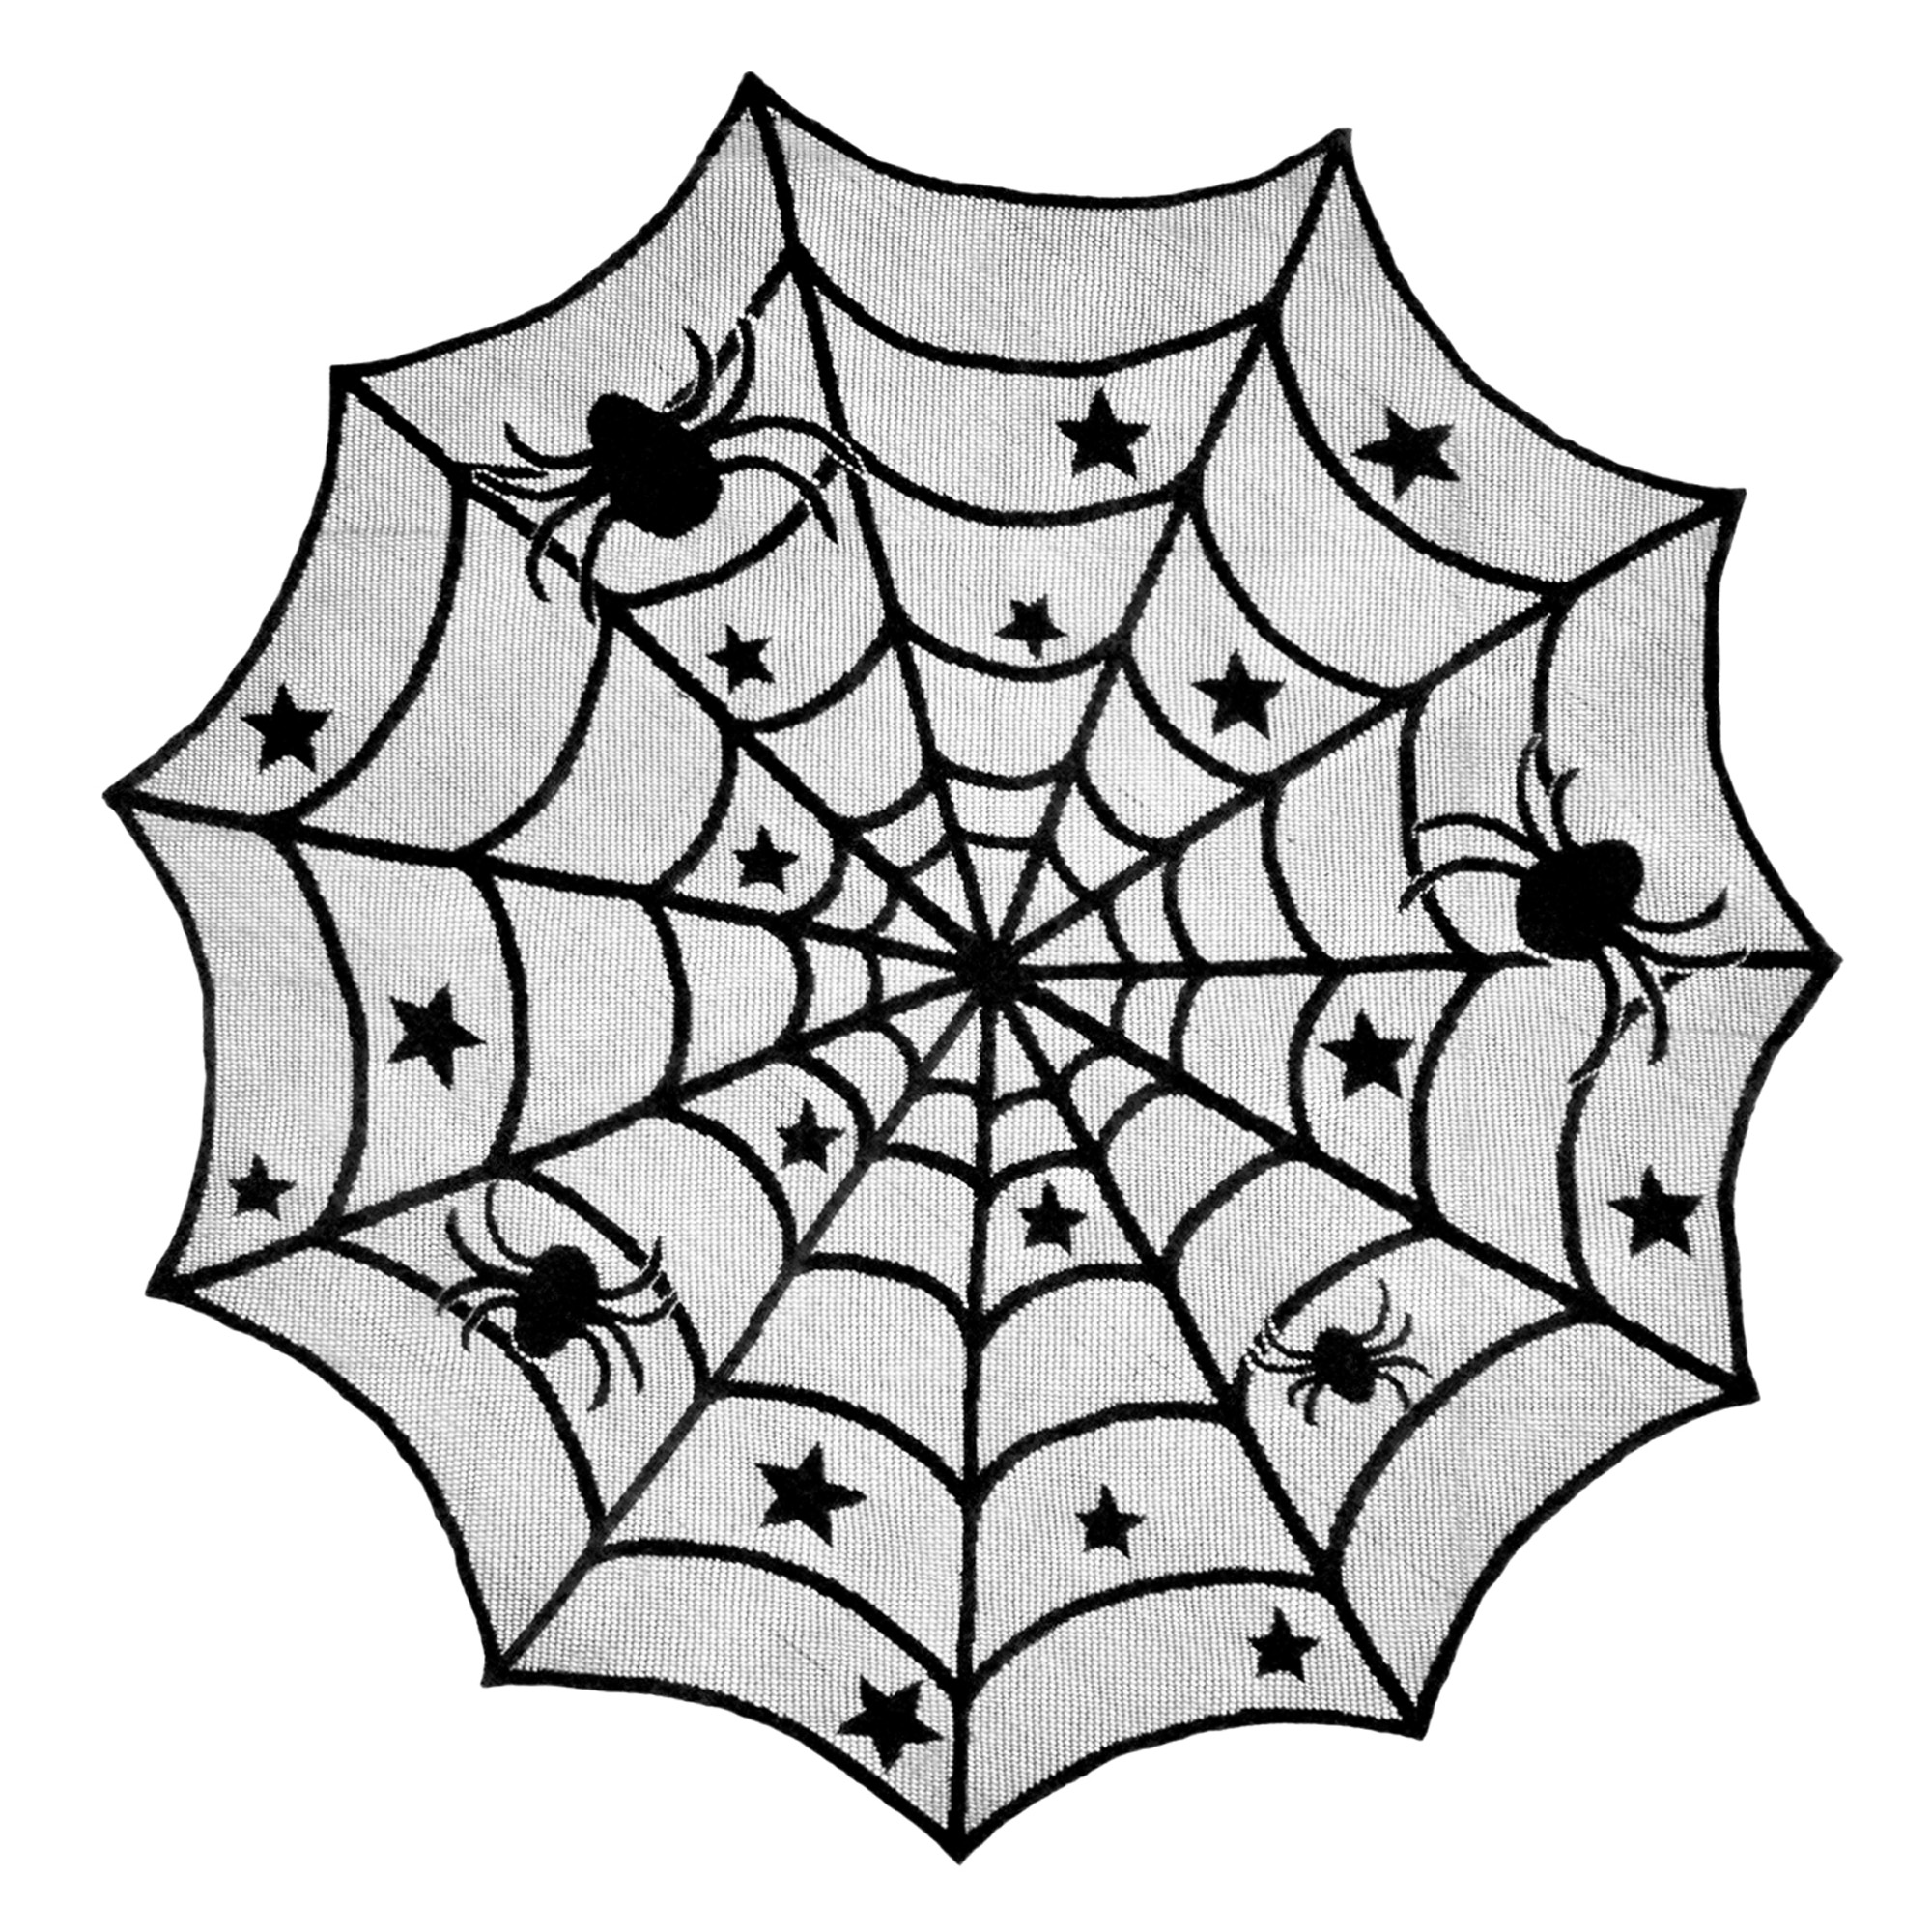 Contemporary Home Living DII 40" Round Polyester Lace Table Topper, Black Spider Web - Perfect for Halloween, Dinner Parties and Scary Movie Nights